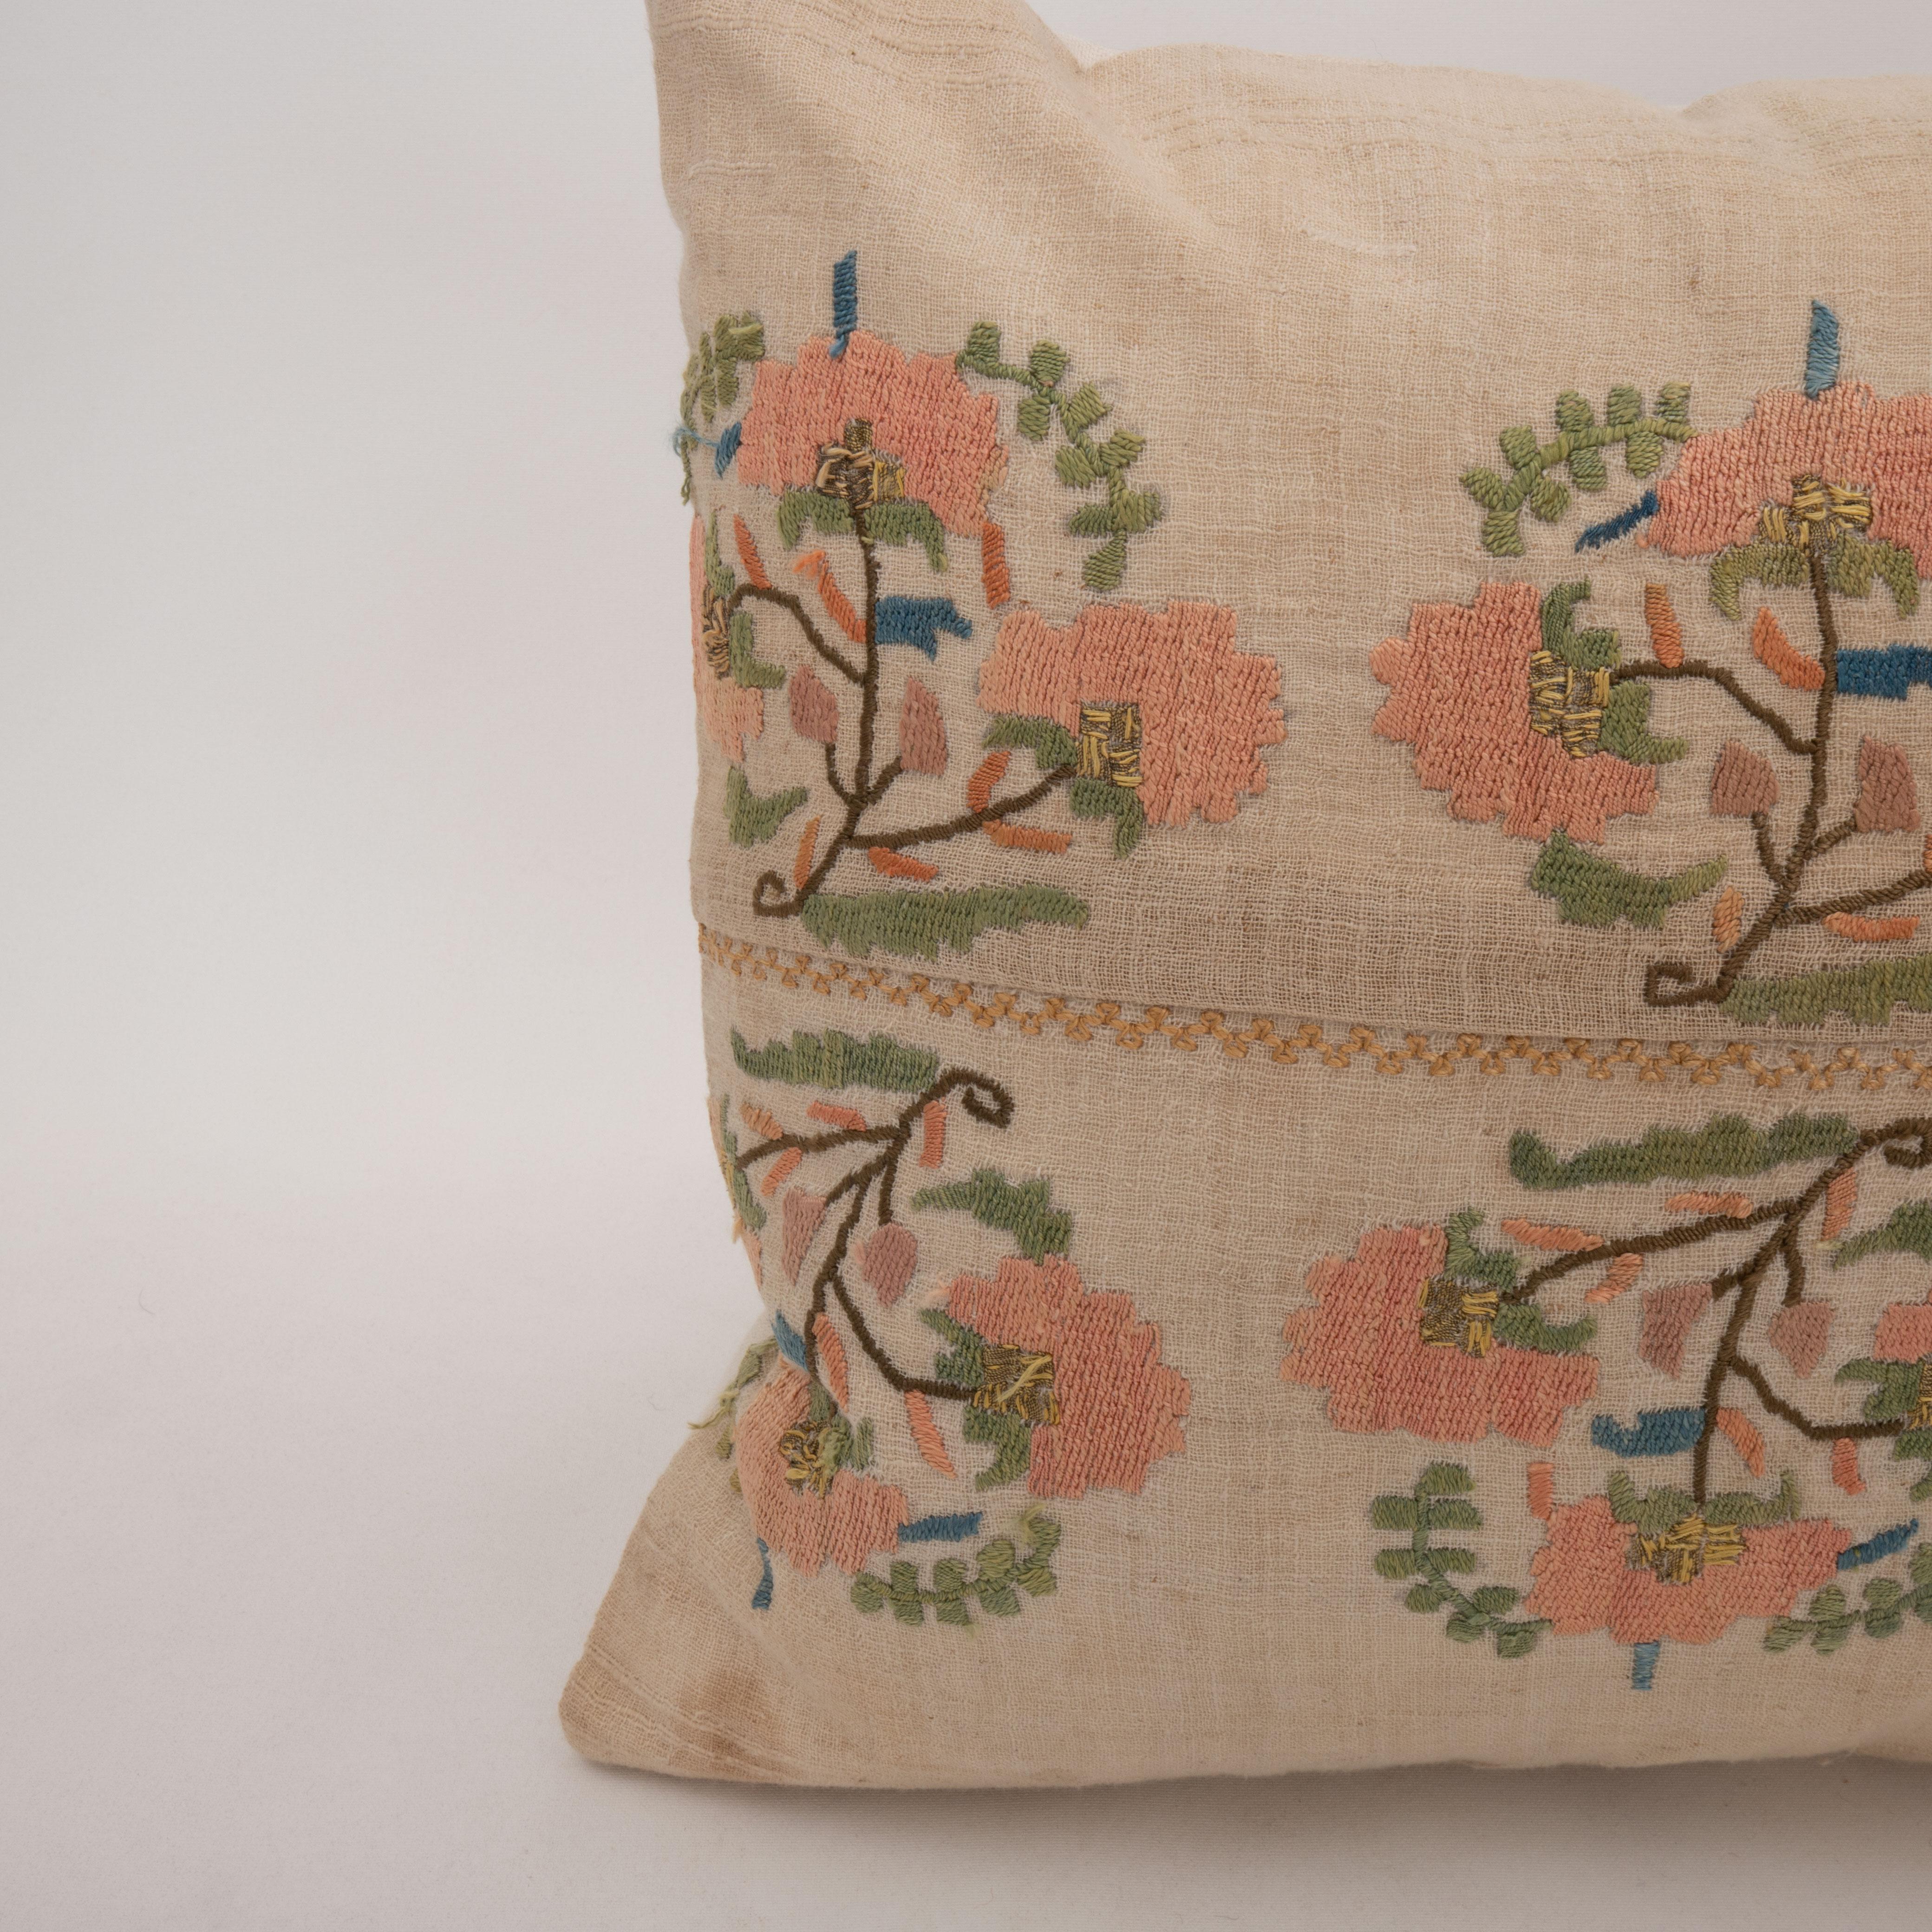 Suzani Pillow Case Made from an Antique Ottoman Embroidery For Sale